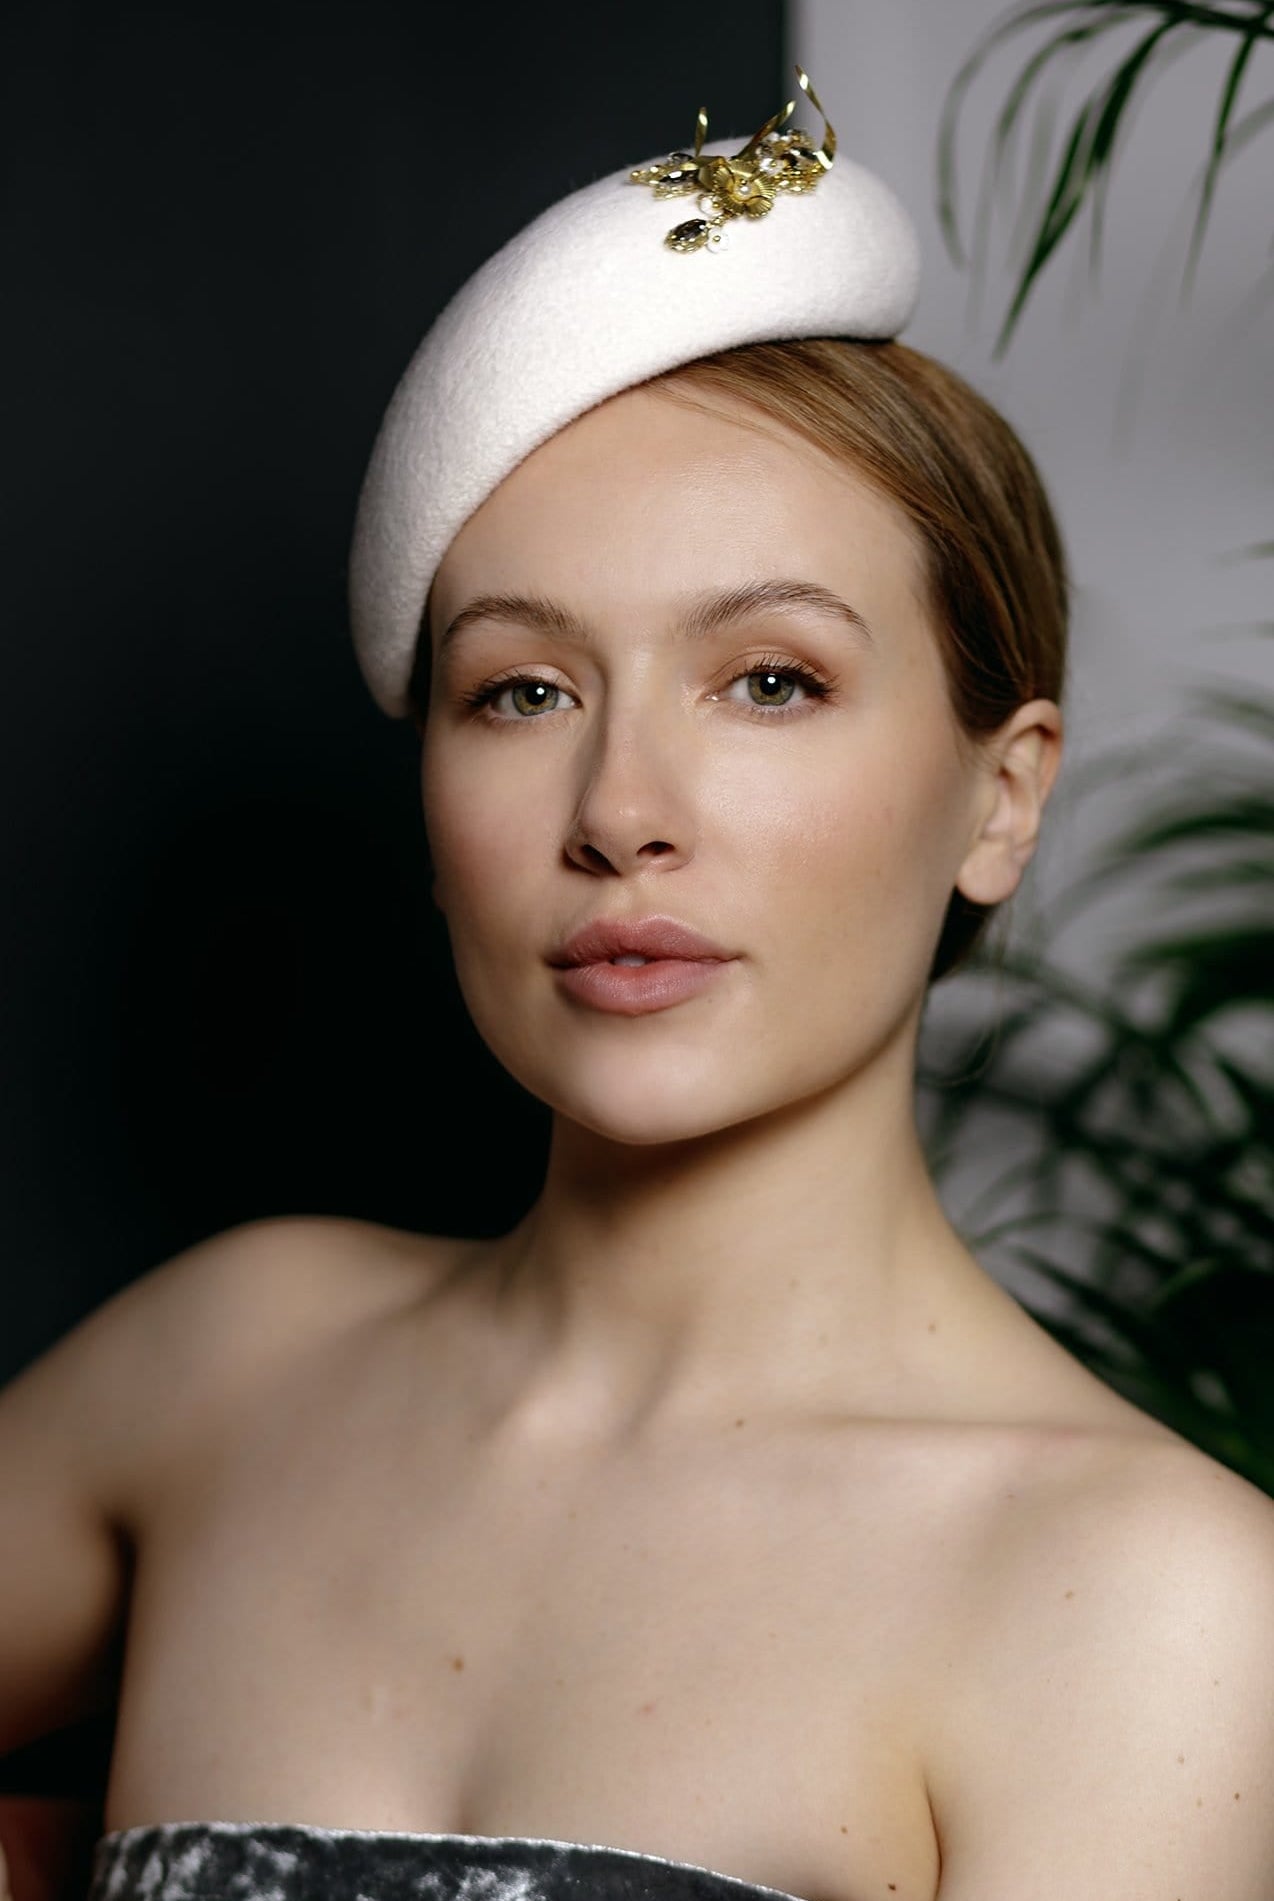 Bridal Cocktail Hat - Lila - Maggie Mowbray Millinery